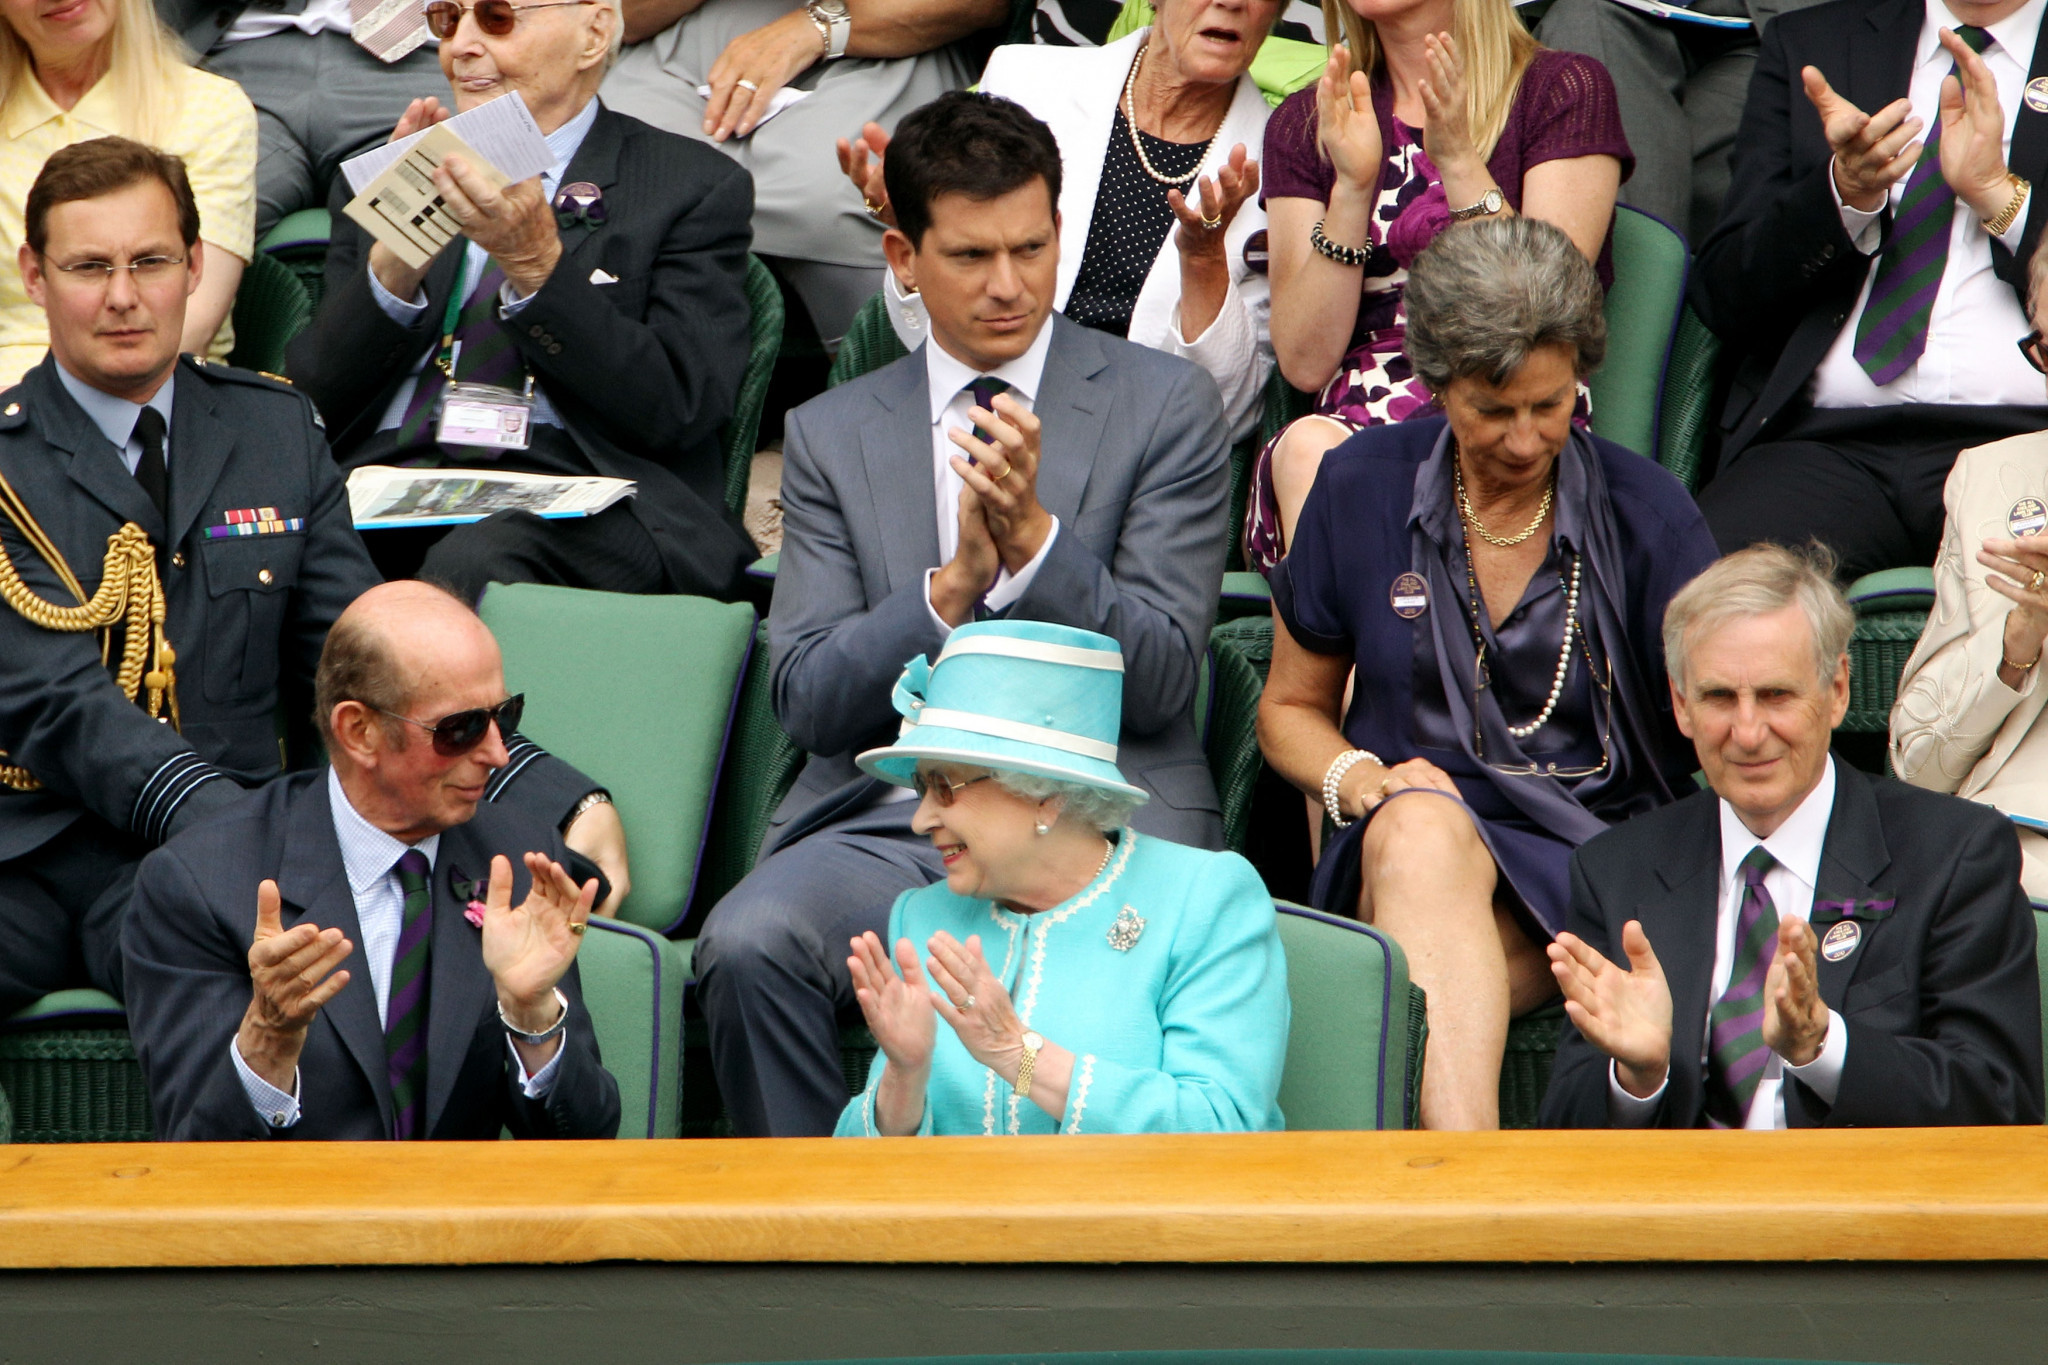 Queen Elizabeth II pictured at the Royal Box at Wimbledon in 2010 ©Getty Images